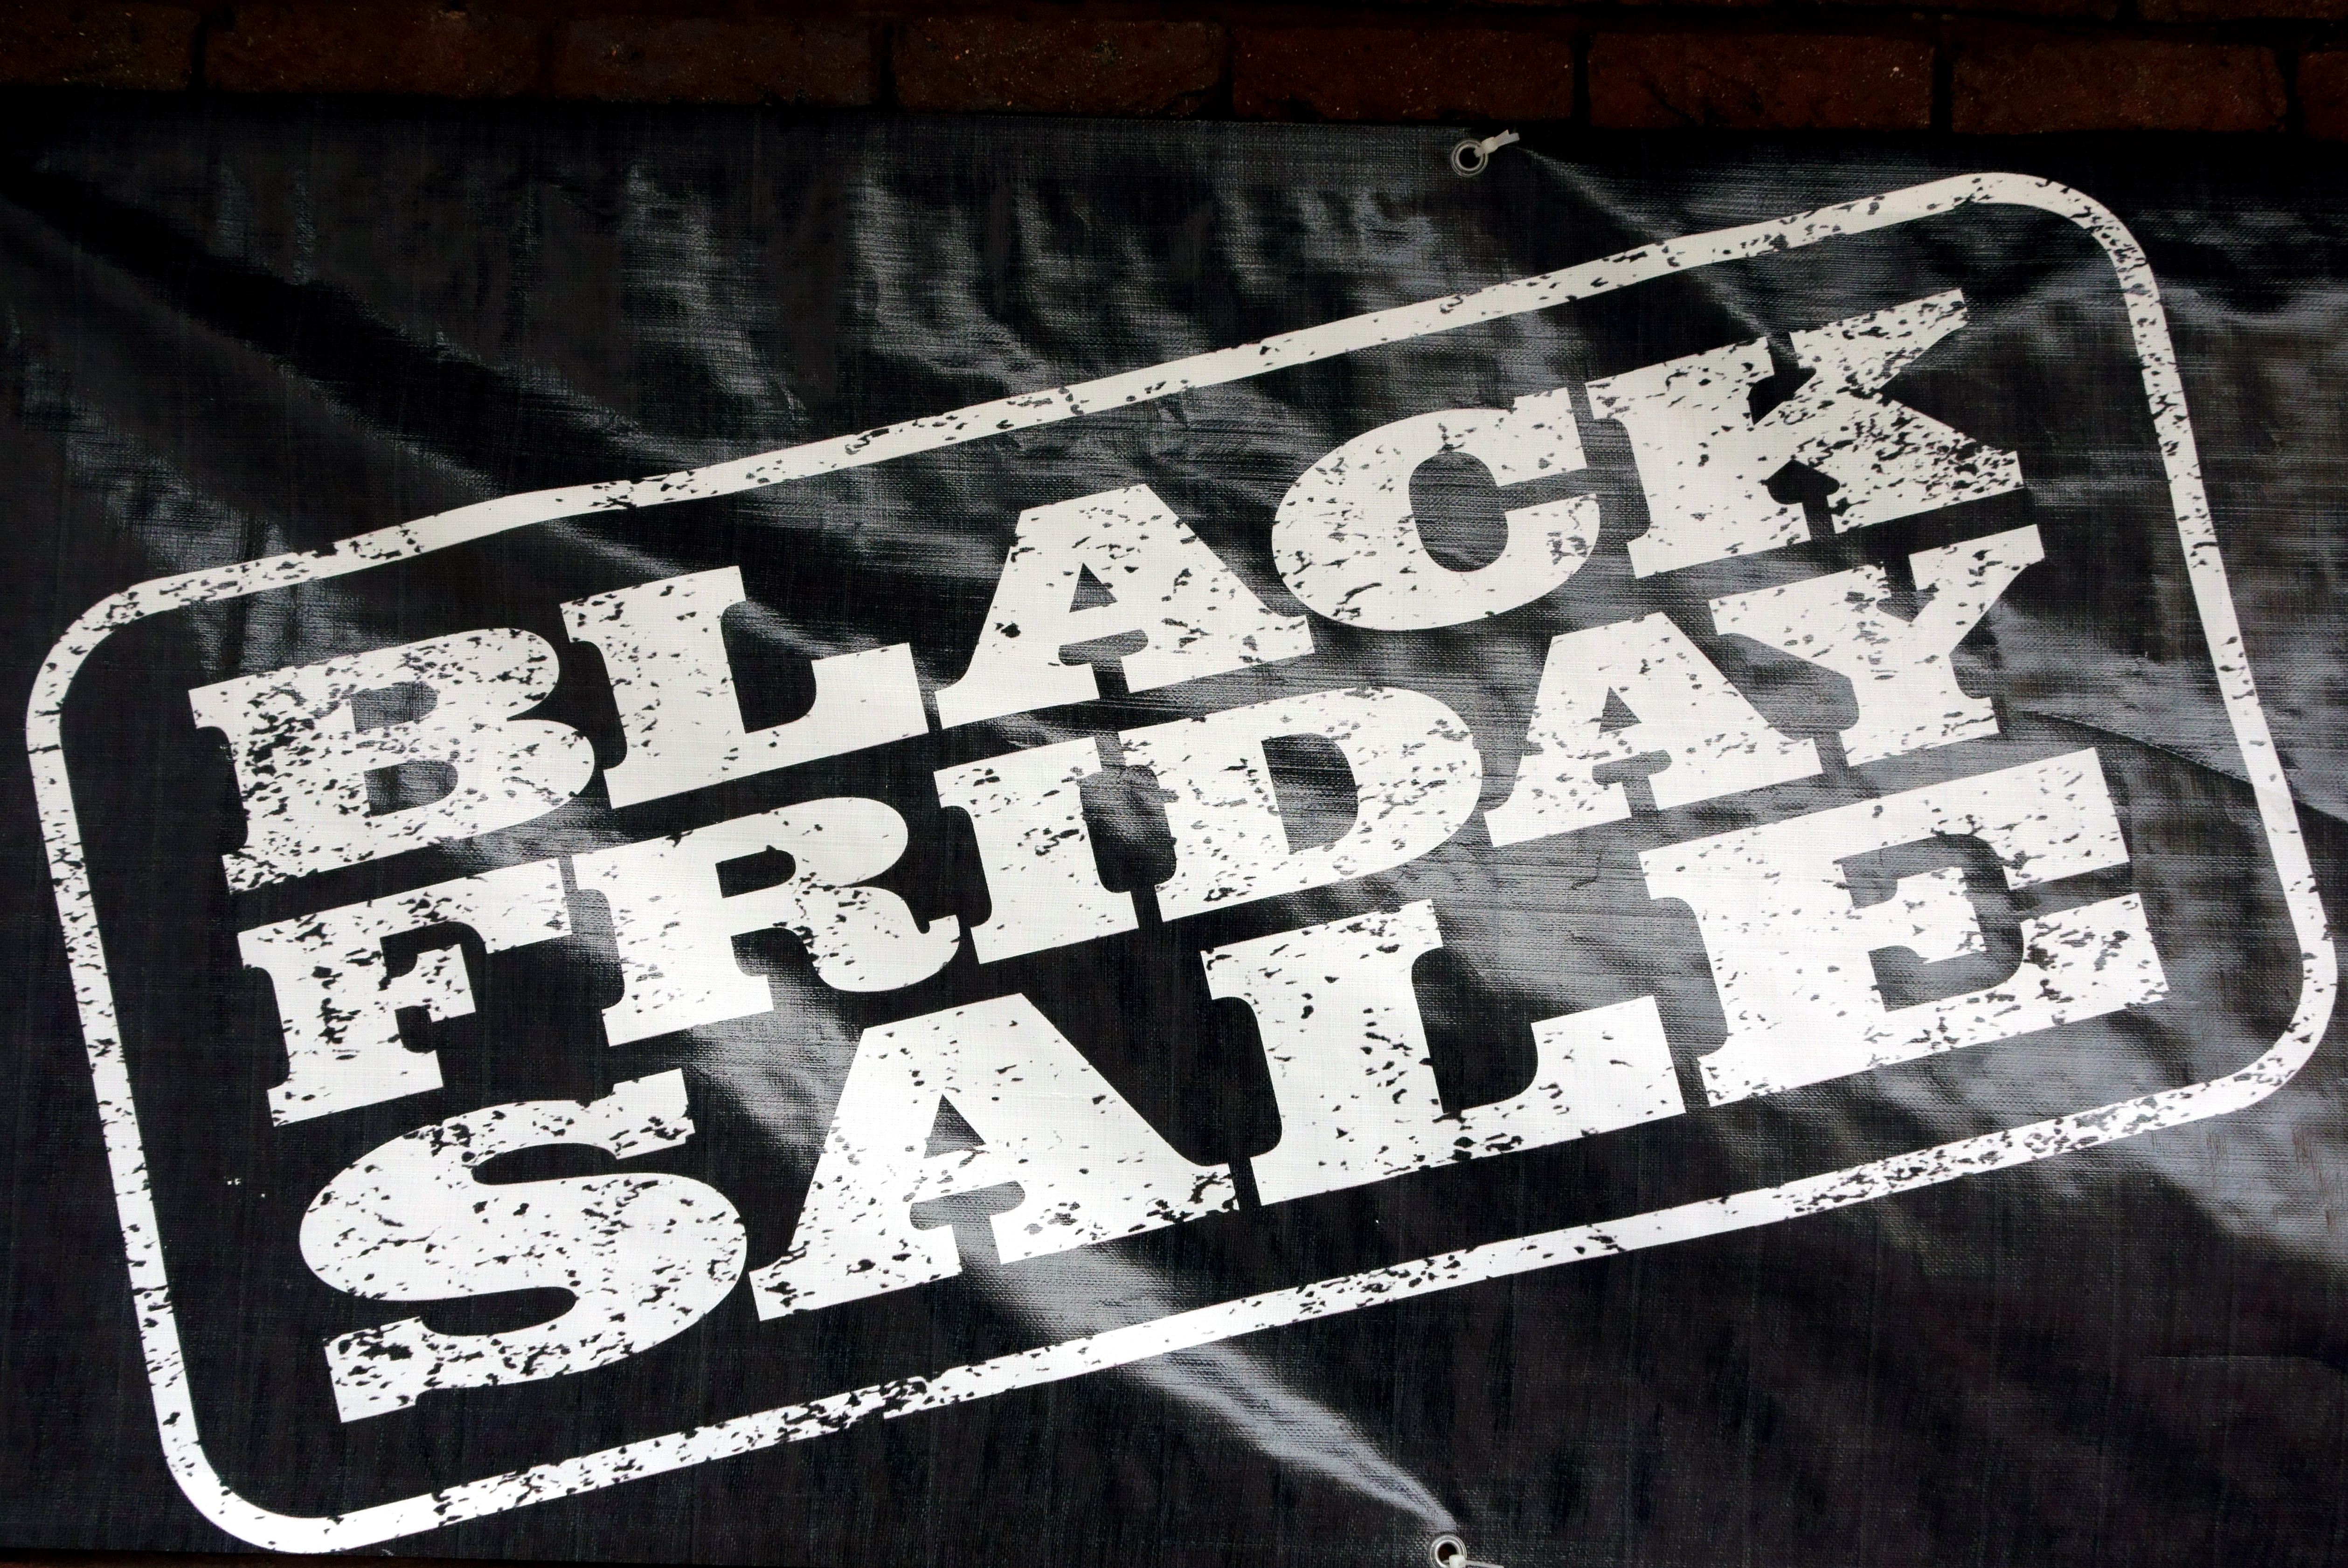 A Black Friday sign